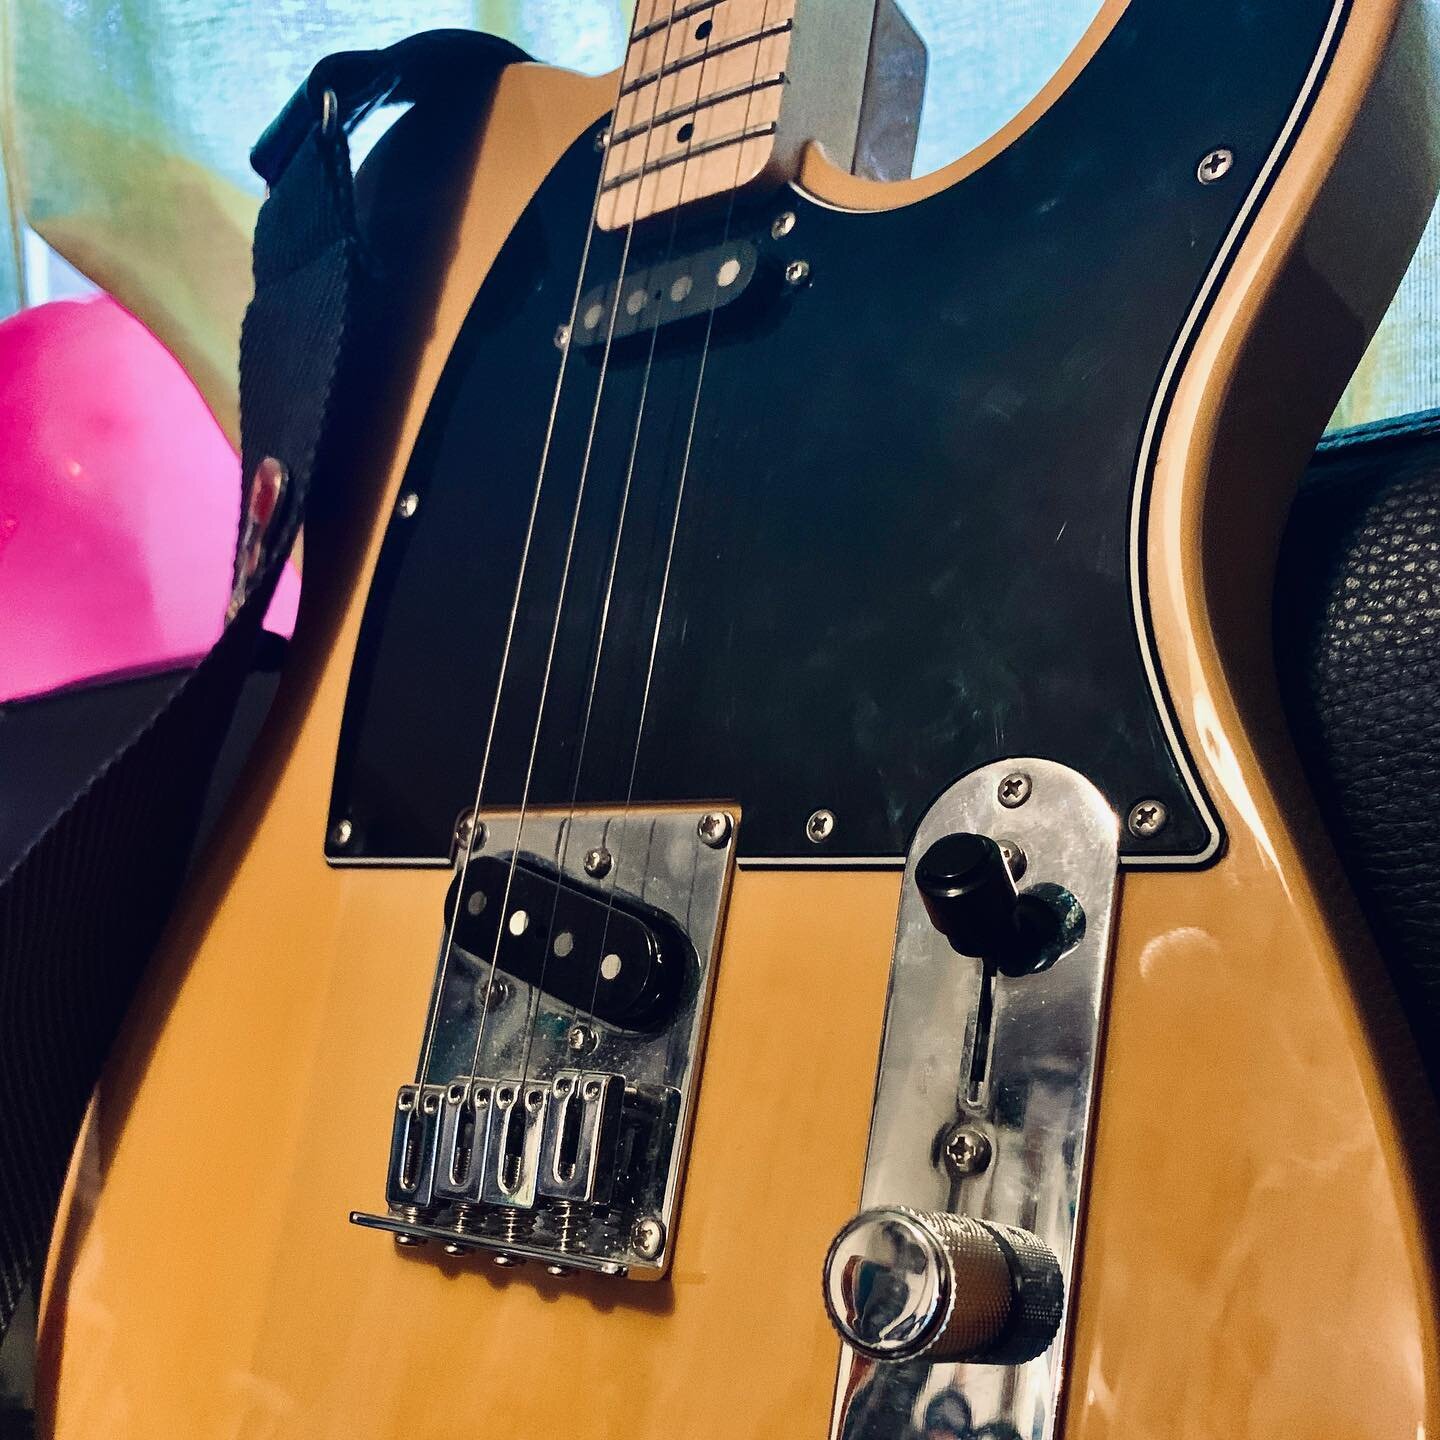 Tele Tuesday. One of my only instruments that is not home made. The @fender Tenor Tele is close to perfection. Kept in CGDG tuning and was the main guitar used on my EP. It&rsquo;s very much a go to instrument for songwriting as well. #tenorguitar #t